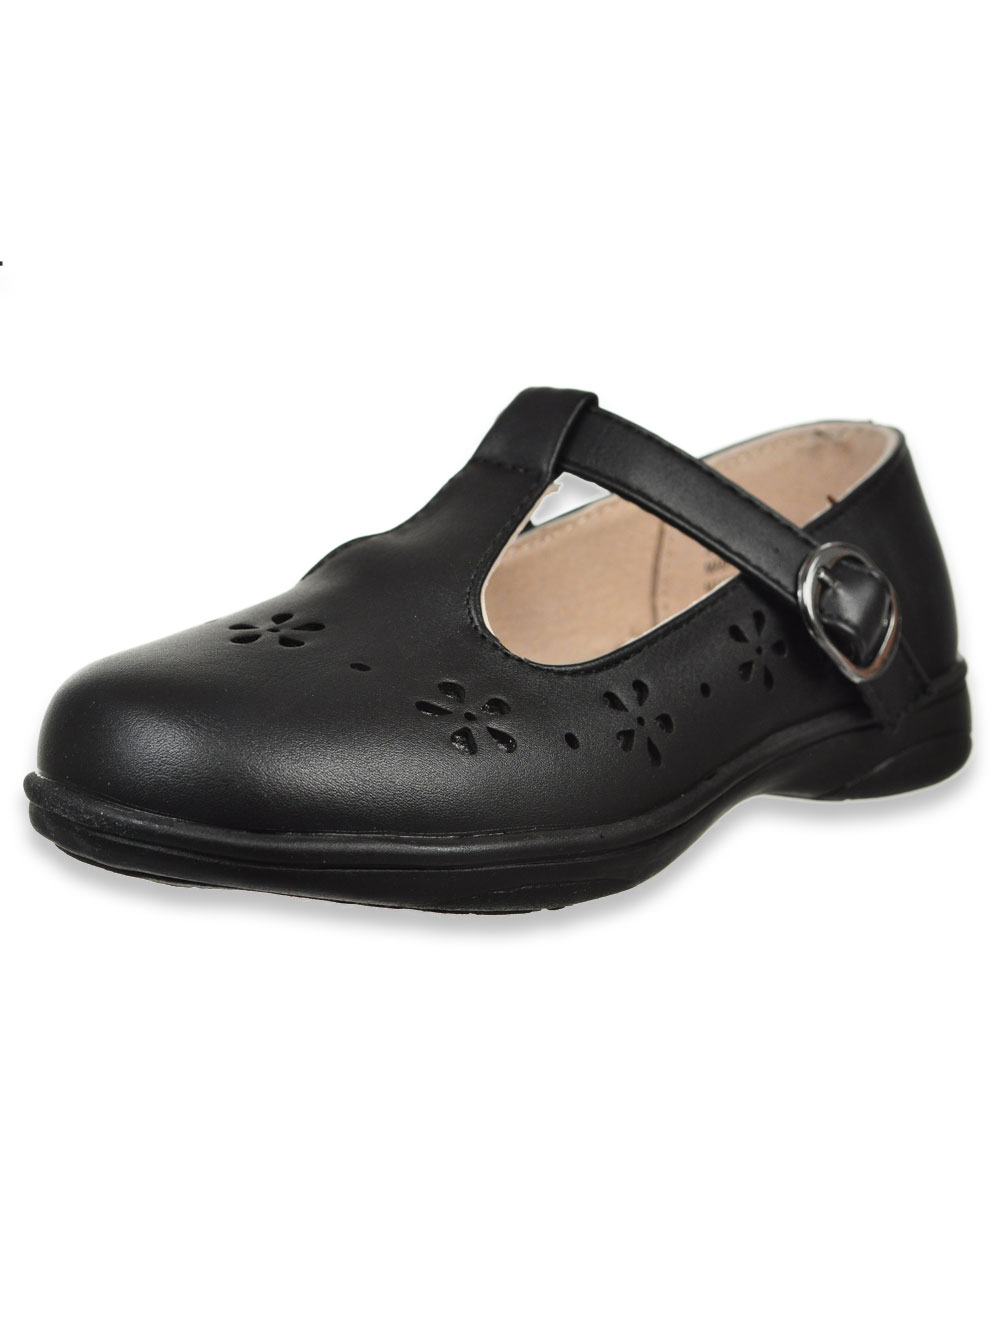 Girls' T-Strap Mary Jane Shoes